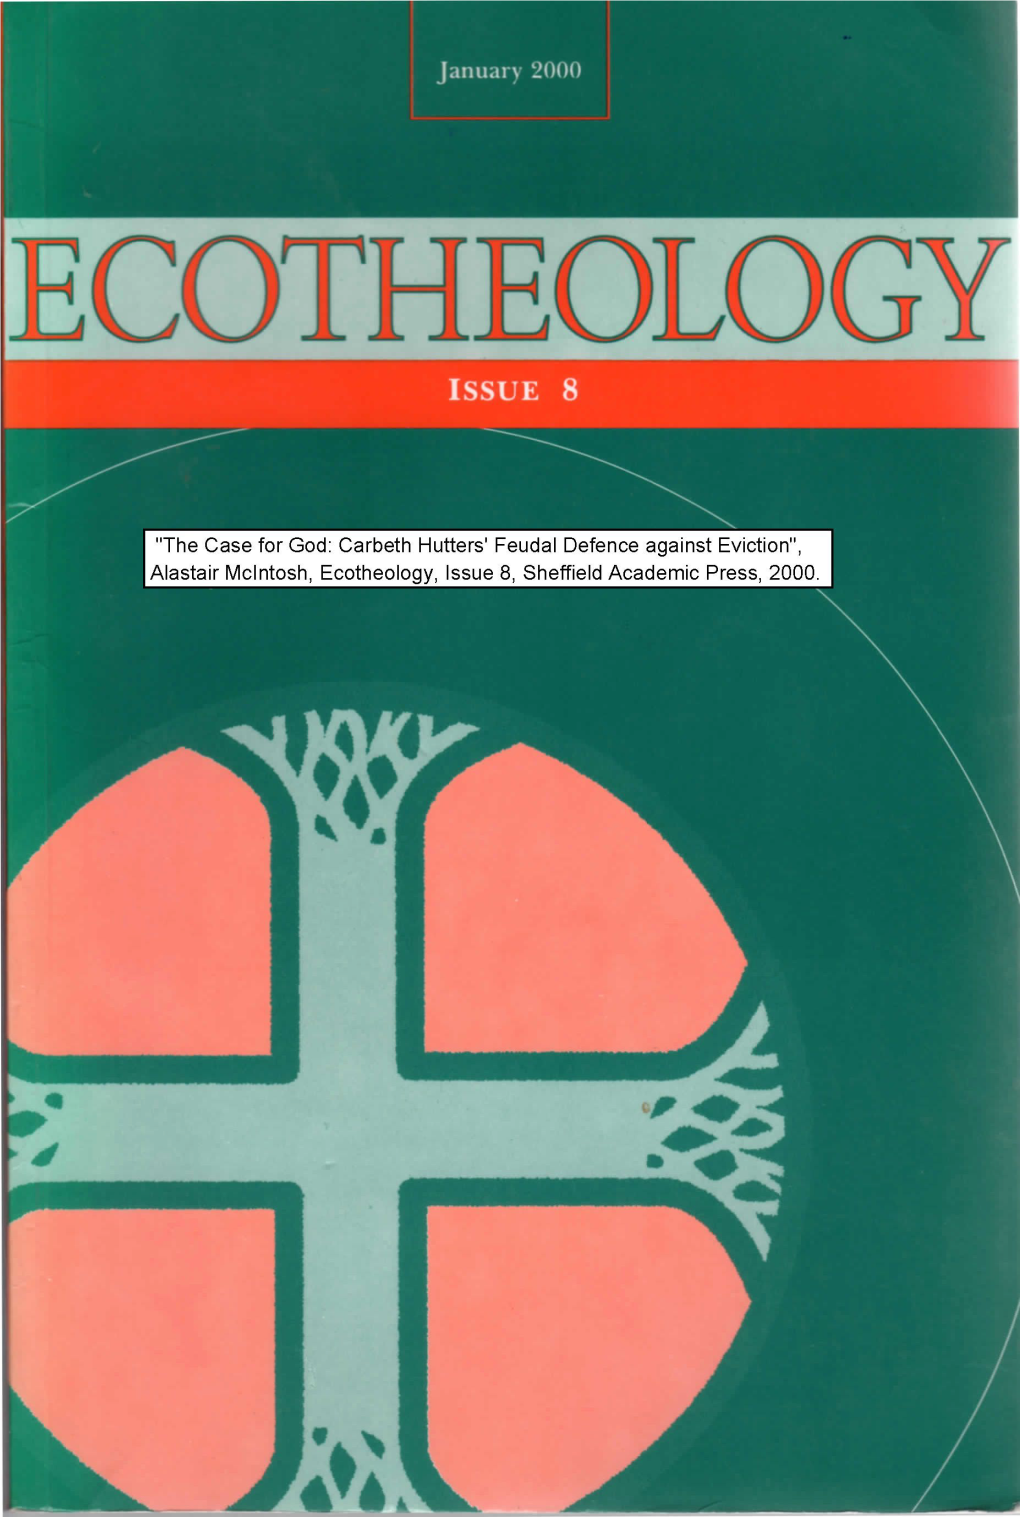 The Case for God: Carbeth Hutters' Feudal Defence Against Eviction", I Alastair Mclntosh, Ecotheology, Issue 8, Sheffield Academic Press, 2000